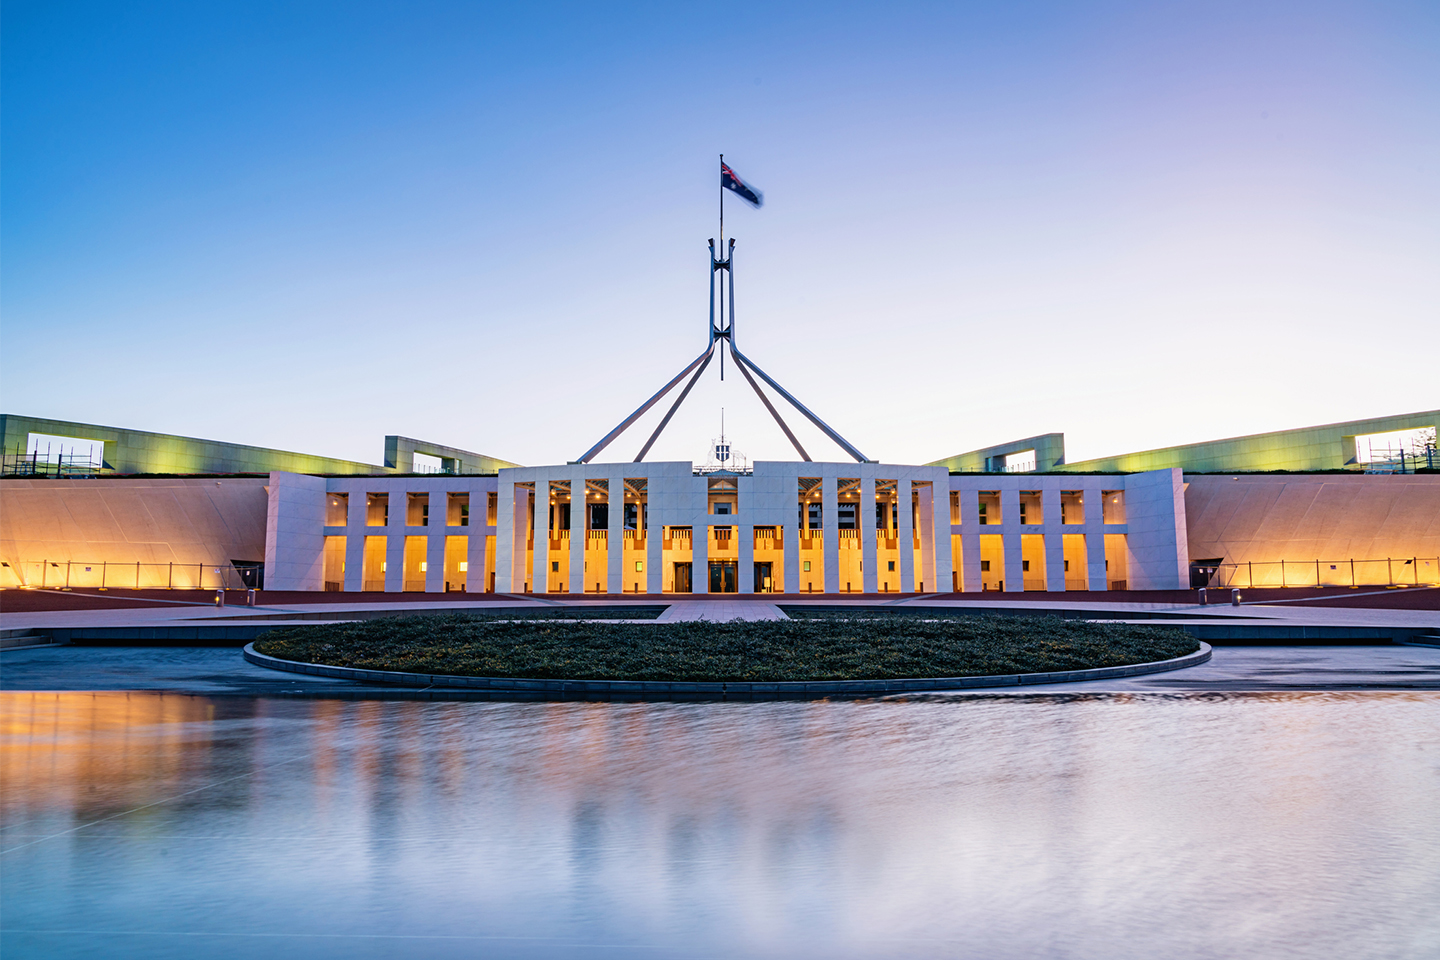 Parliament House Canberra at dusk